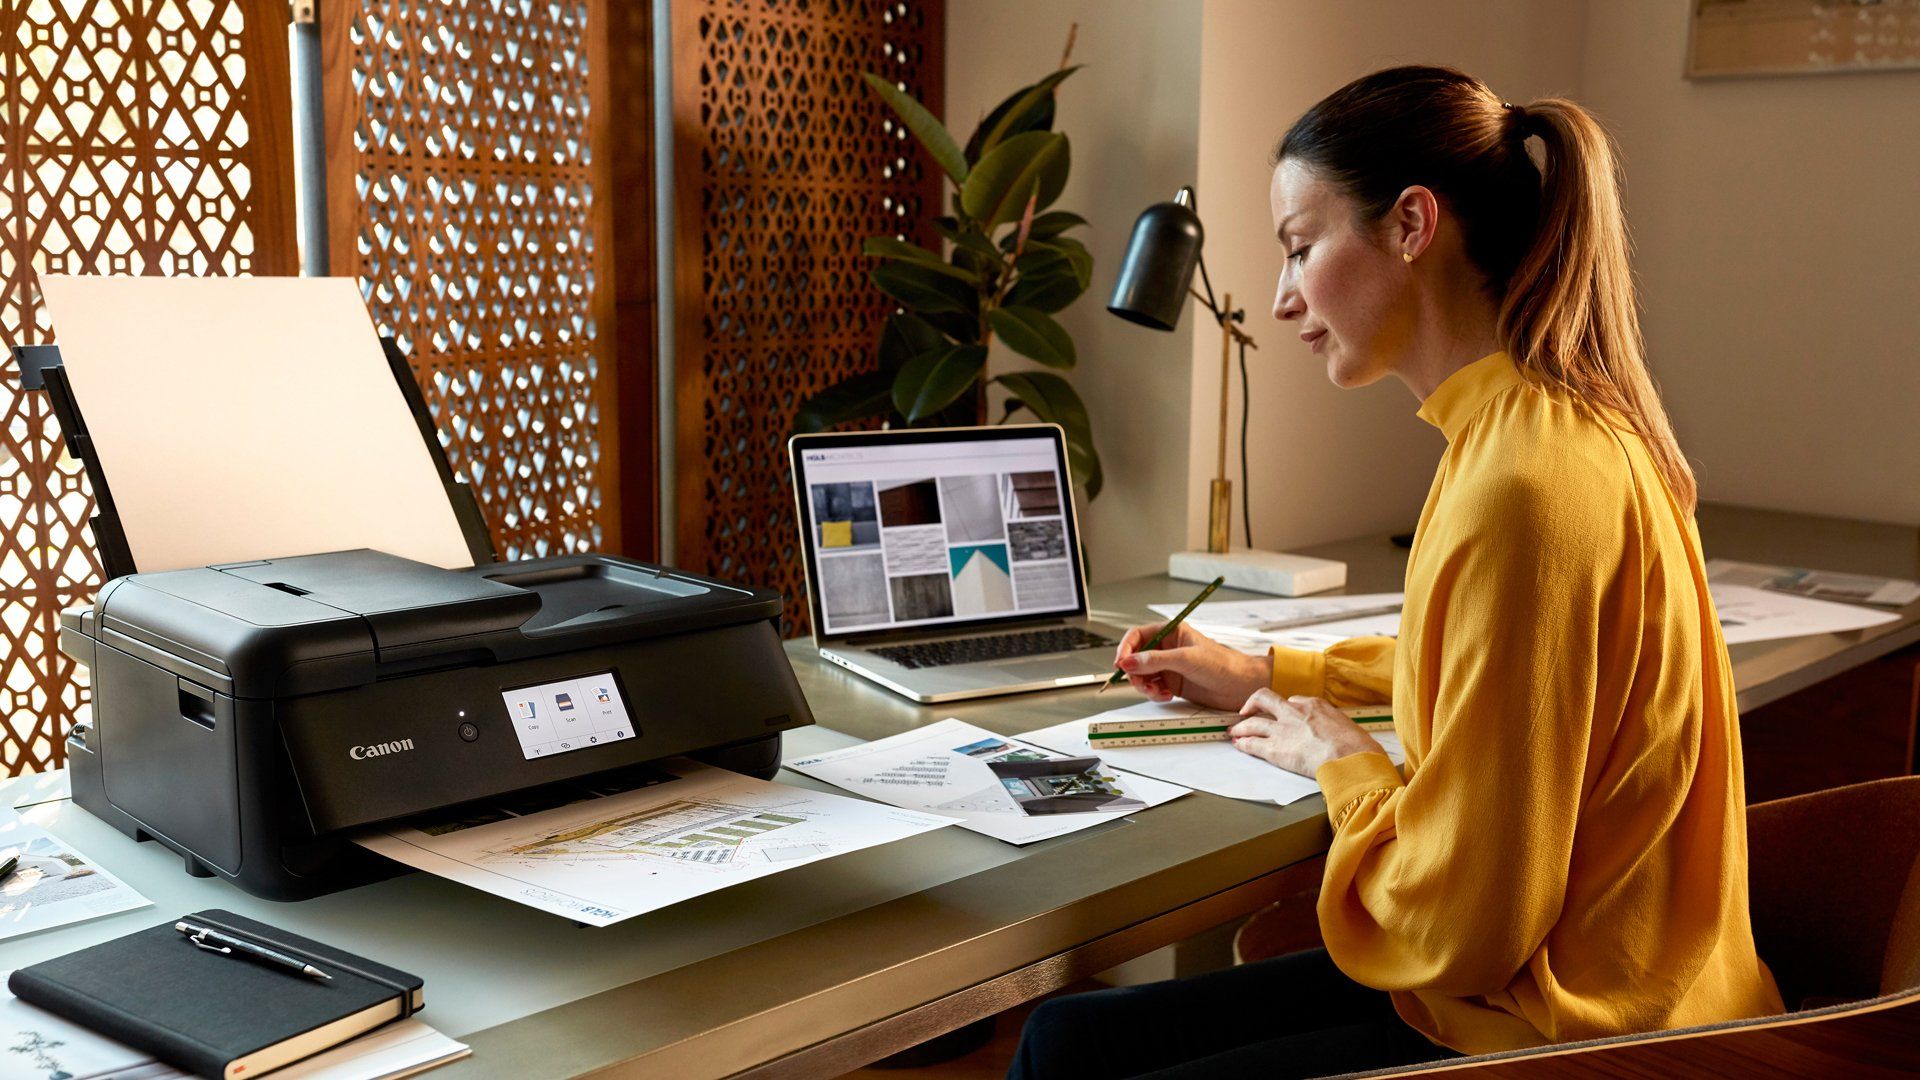 A female business owner prints with PIXMA TS9540 while drawing and using a ruler at her desk.